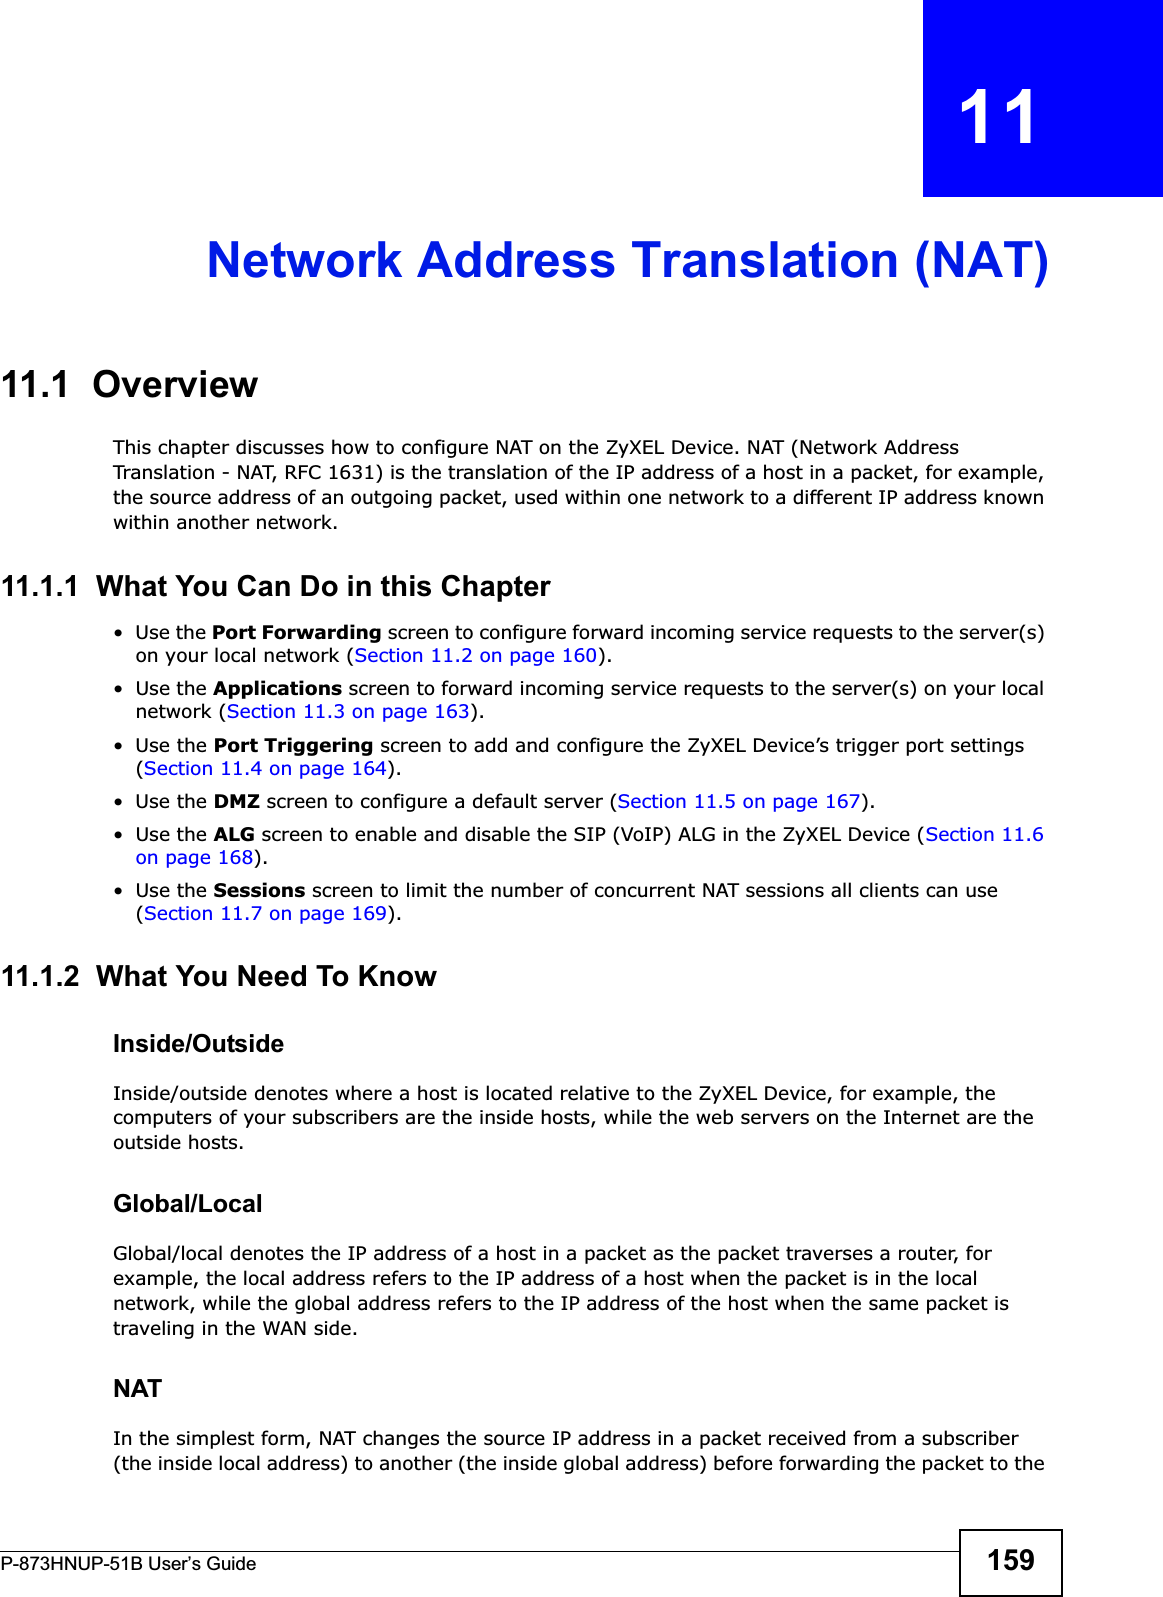 P-873HNUP-51B User’s Guide 159CHAPTER   11Network Address Translation (NAT)11.1  OverviewThis chapter discusses how to configure NAT on the ZyXEL Device. NAT (Network Address Translation - NAT, RFC 1631) is the translation of the IP address of a host in a packet, for example, the source address of an outgoing packet, used within one network to a different IP address known within another network.11.1.1  What You Can Do in this Chapter•Use the Port Forwarding screen to configure forward incoming service requests to the server(s) on your local network (Section 11.2 on page 160).•Use the Applications screen to forward incoming service requests to the server(s) on your local network (Section 11.3 on page 163).•Use the Port Triggering screen to add and configure the ZyXEL Device’s trigger port settings (Section 11.4 on page 164).•Use the DMZ screen to configure a default server (Section 11.5 on page 167).•Use the ALG screen to enable and disable the SIP (VoIP) ALG in the ZyXEL Device (Section 11.6 on page 168).•Use the Sessions screen to limit the number of concurrent NAT sessions all clients can use (Section 11.7 on page 169).11.1.2  What You Need To KnowInside/OutsideInside/outside denotes where a host is located relative to the ZyXEL Device, for example, the computers of your subscribers are the inside hosts, while the web servers on the Internet are the outside hosts. Global/LocalGlobal/local denotes the IP address of a host in a packet as the packet traverses a router, for example, the local address refers to the IP address of a host when the packet is in the local network, while the global address refers to the IP address of the host when the same packet is traveling in the WAN side. NATIn the simplest form, NAT changes the source IP address in a packet received from a subscriber (the inside local address) to another (the inside global address) before forwarding the packet to the 